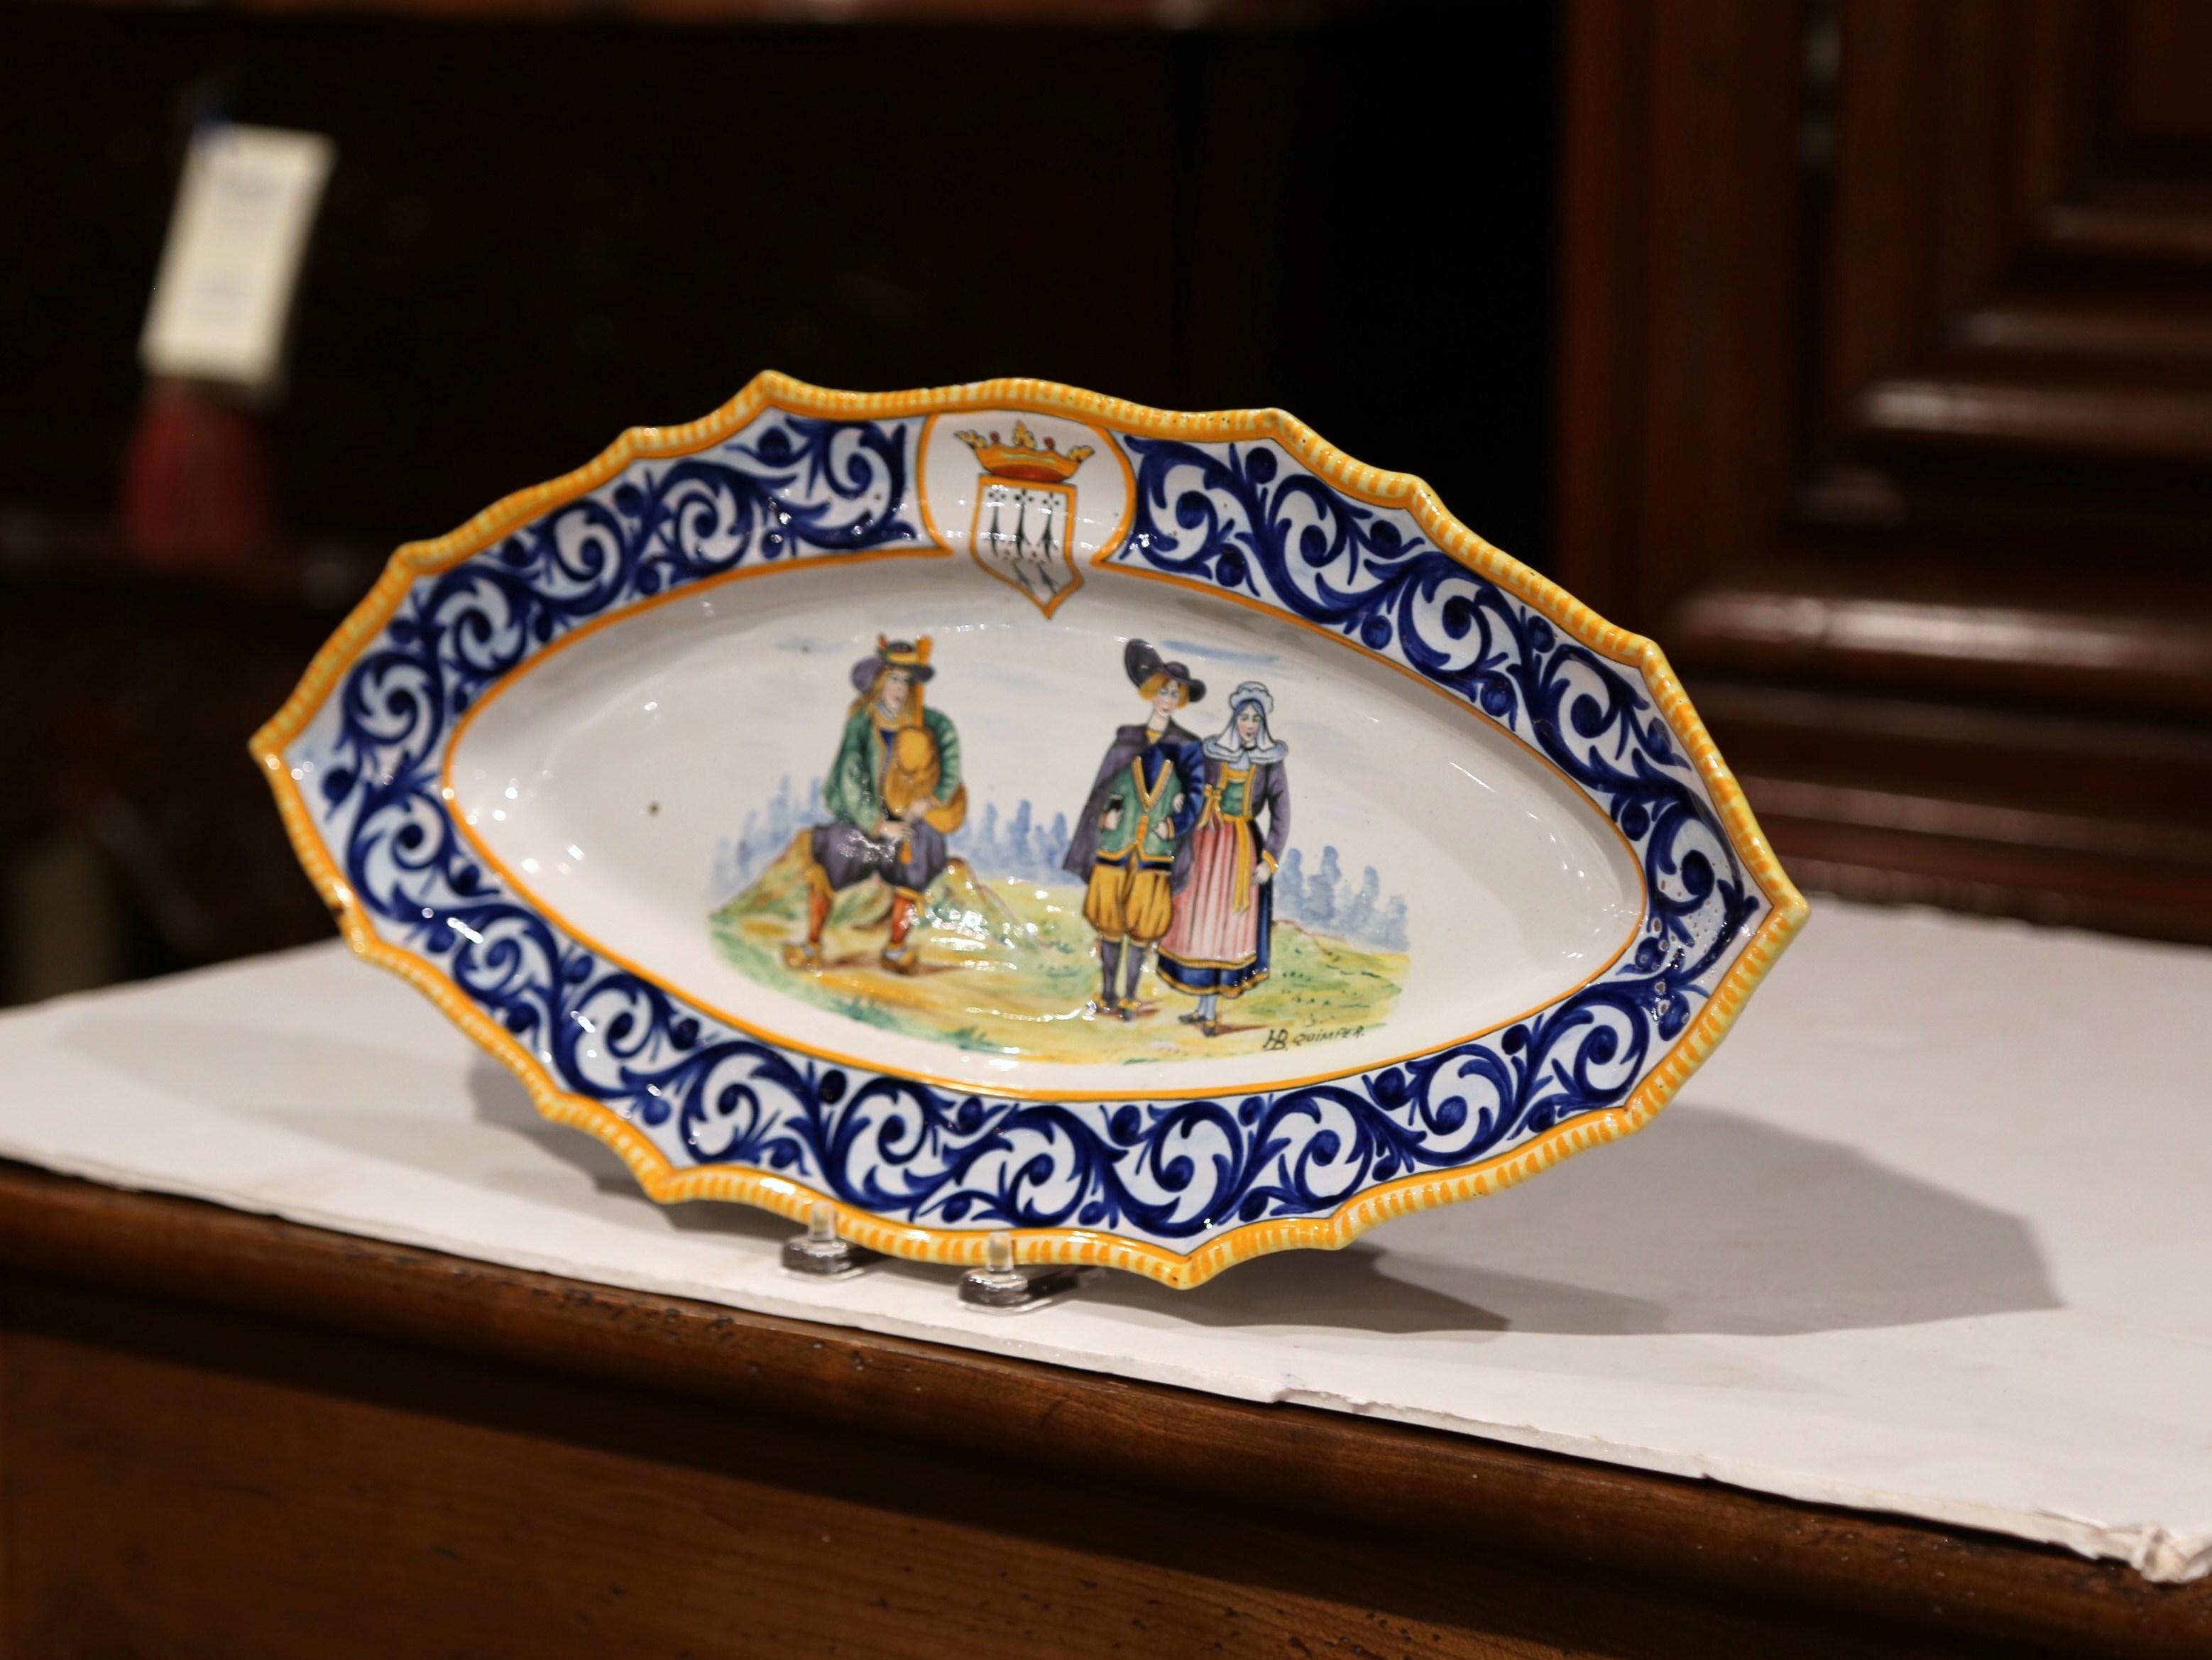 Decorate a wall or a shelf with this colorful, antique platter. Created in Brittany, France circa 1960, the hand painted ceramic plate depicts a Breton couple in traditional costumes and a seated man playing the bagpipe. The oval, porcelain platter